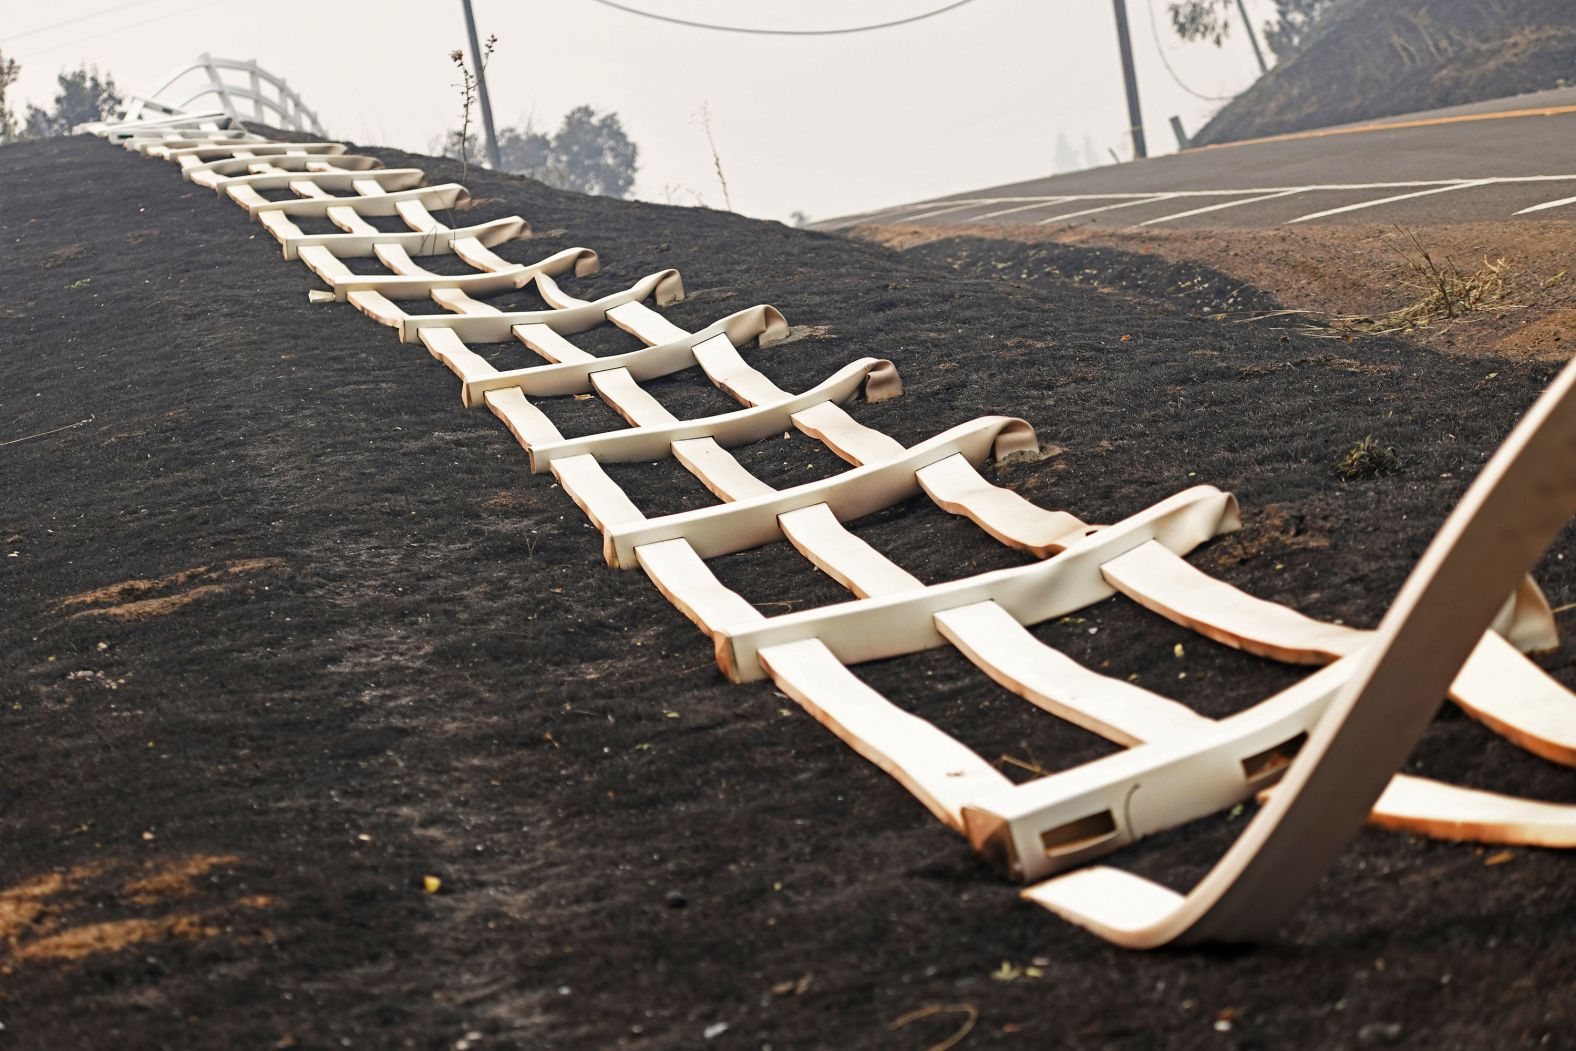 A melted plastic fence lies on the charred ground after fire swept through Vacaville on August 20, 2020.